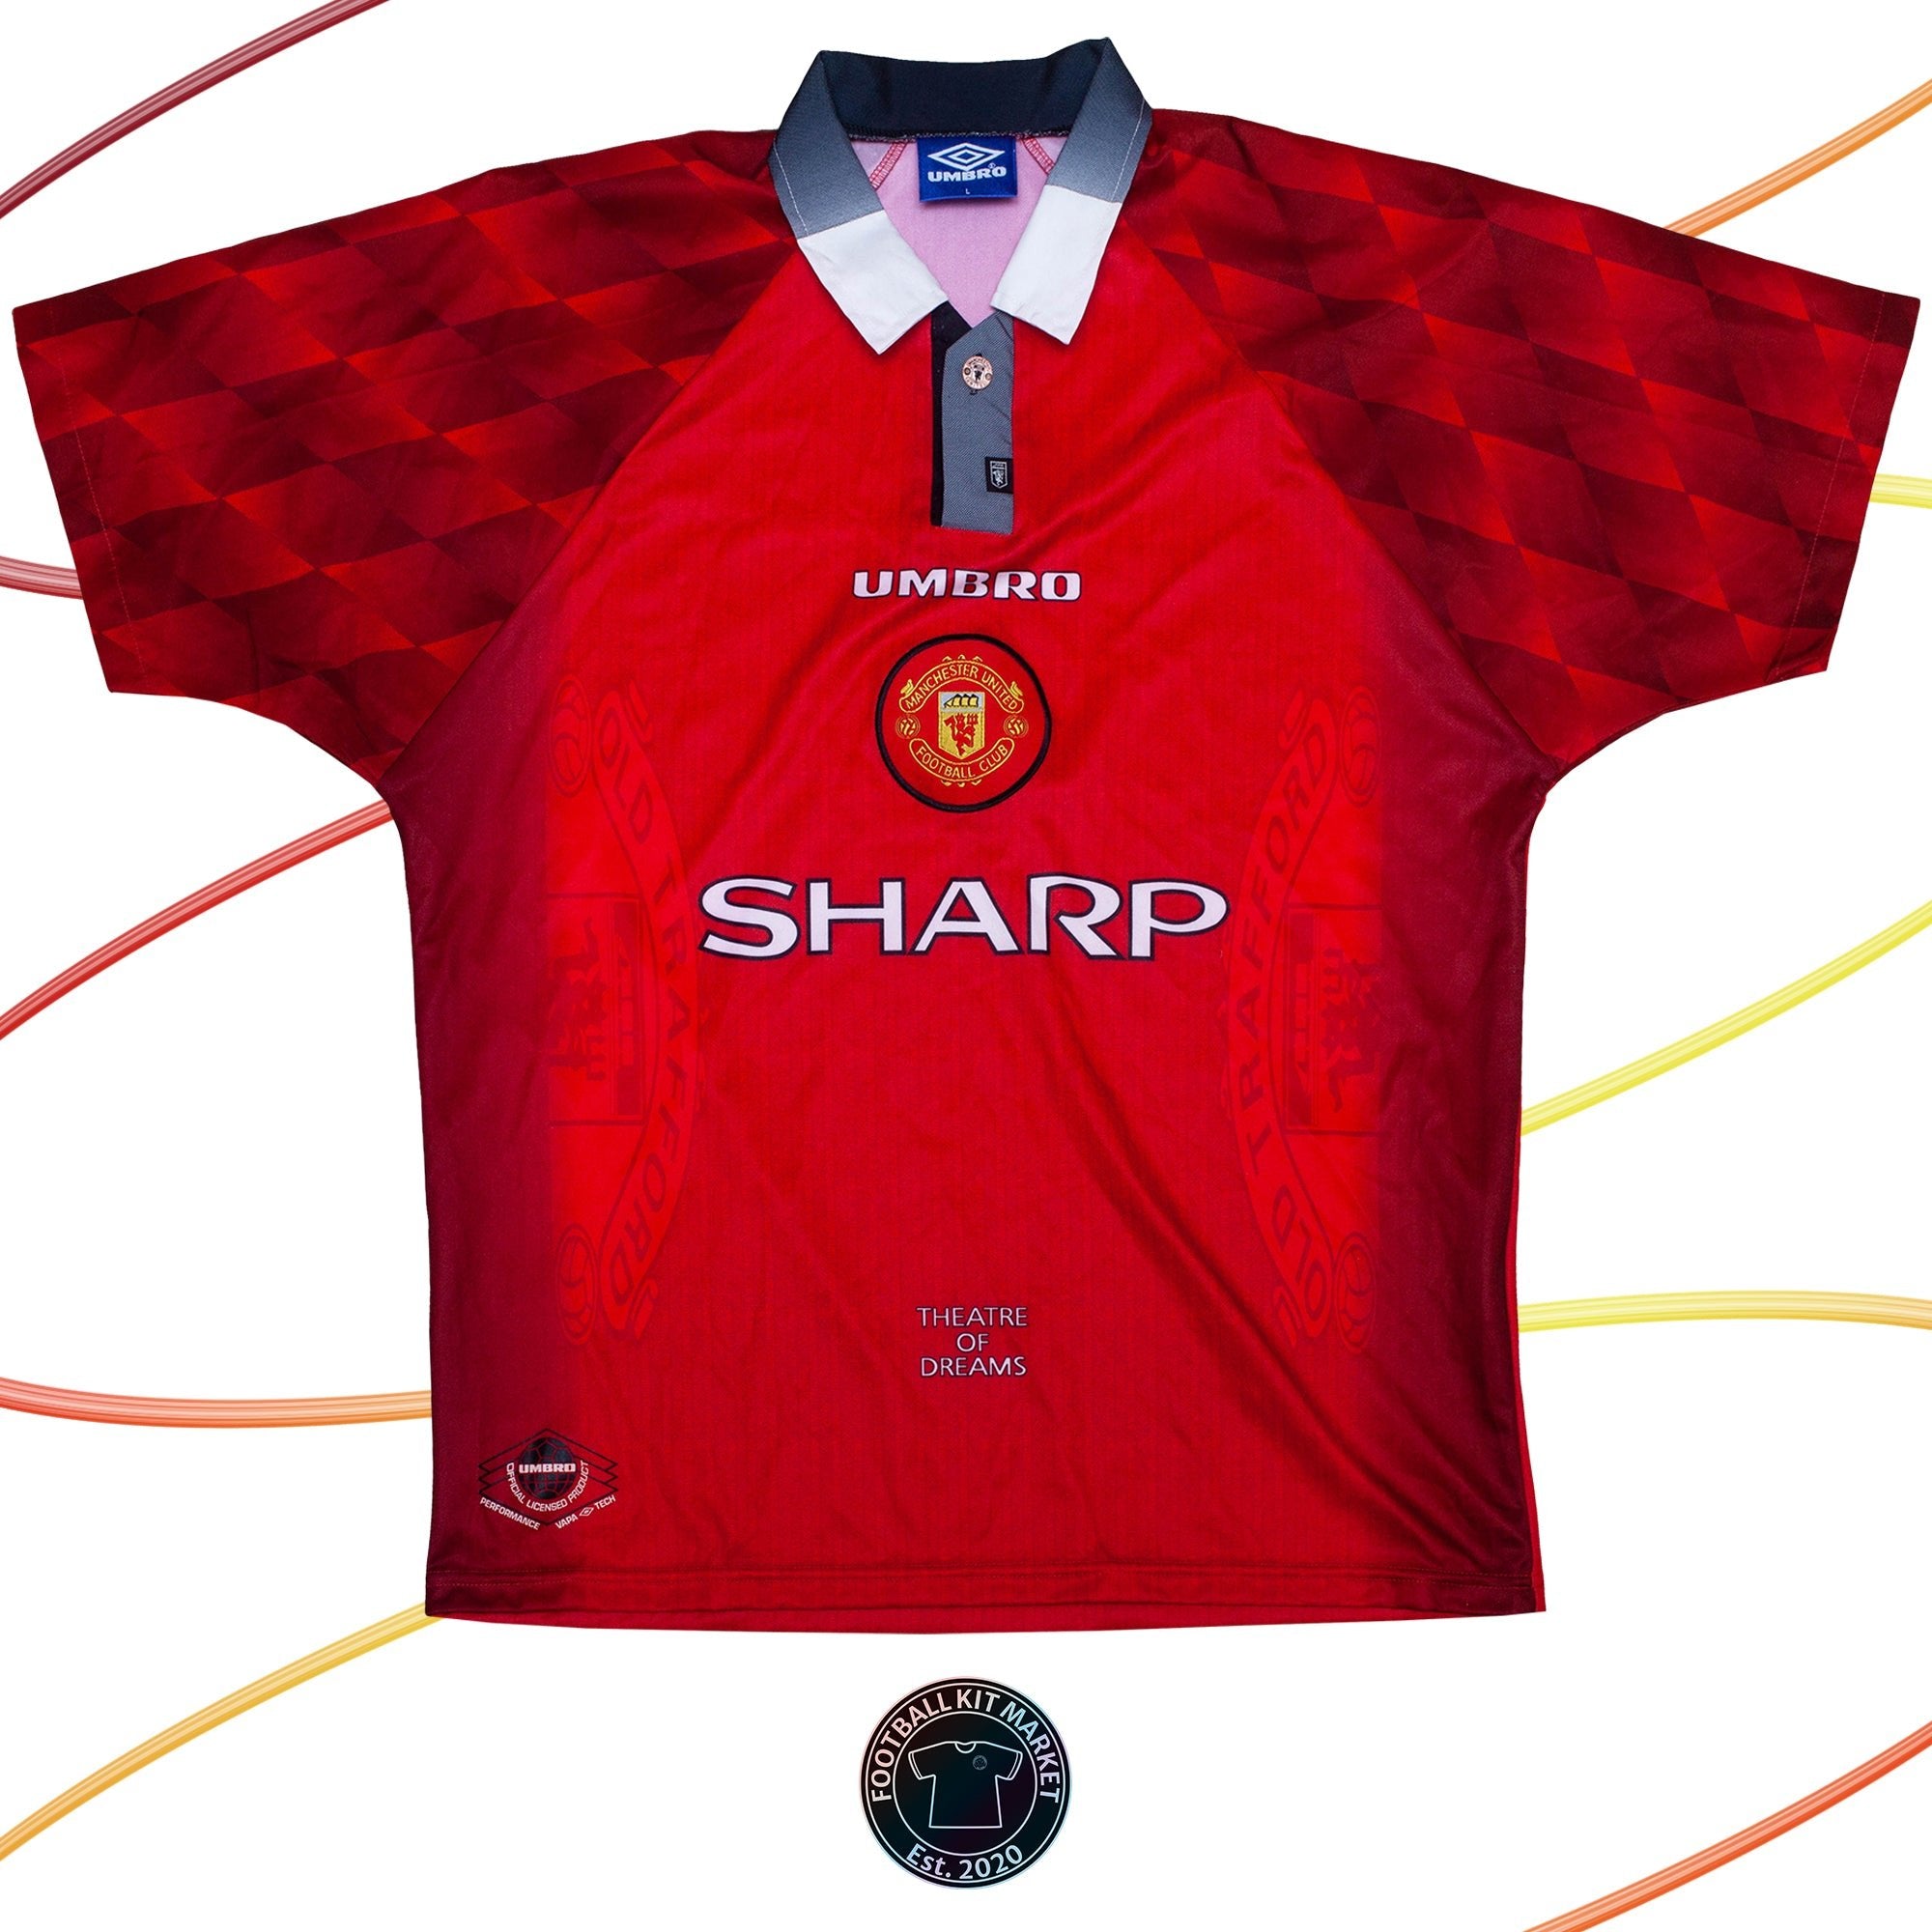 Genuine MANCHESTER UNITED Home Shirt (1996-1998) - UMBRO (L) - Product Image from Football Kit Market